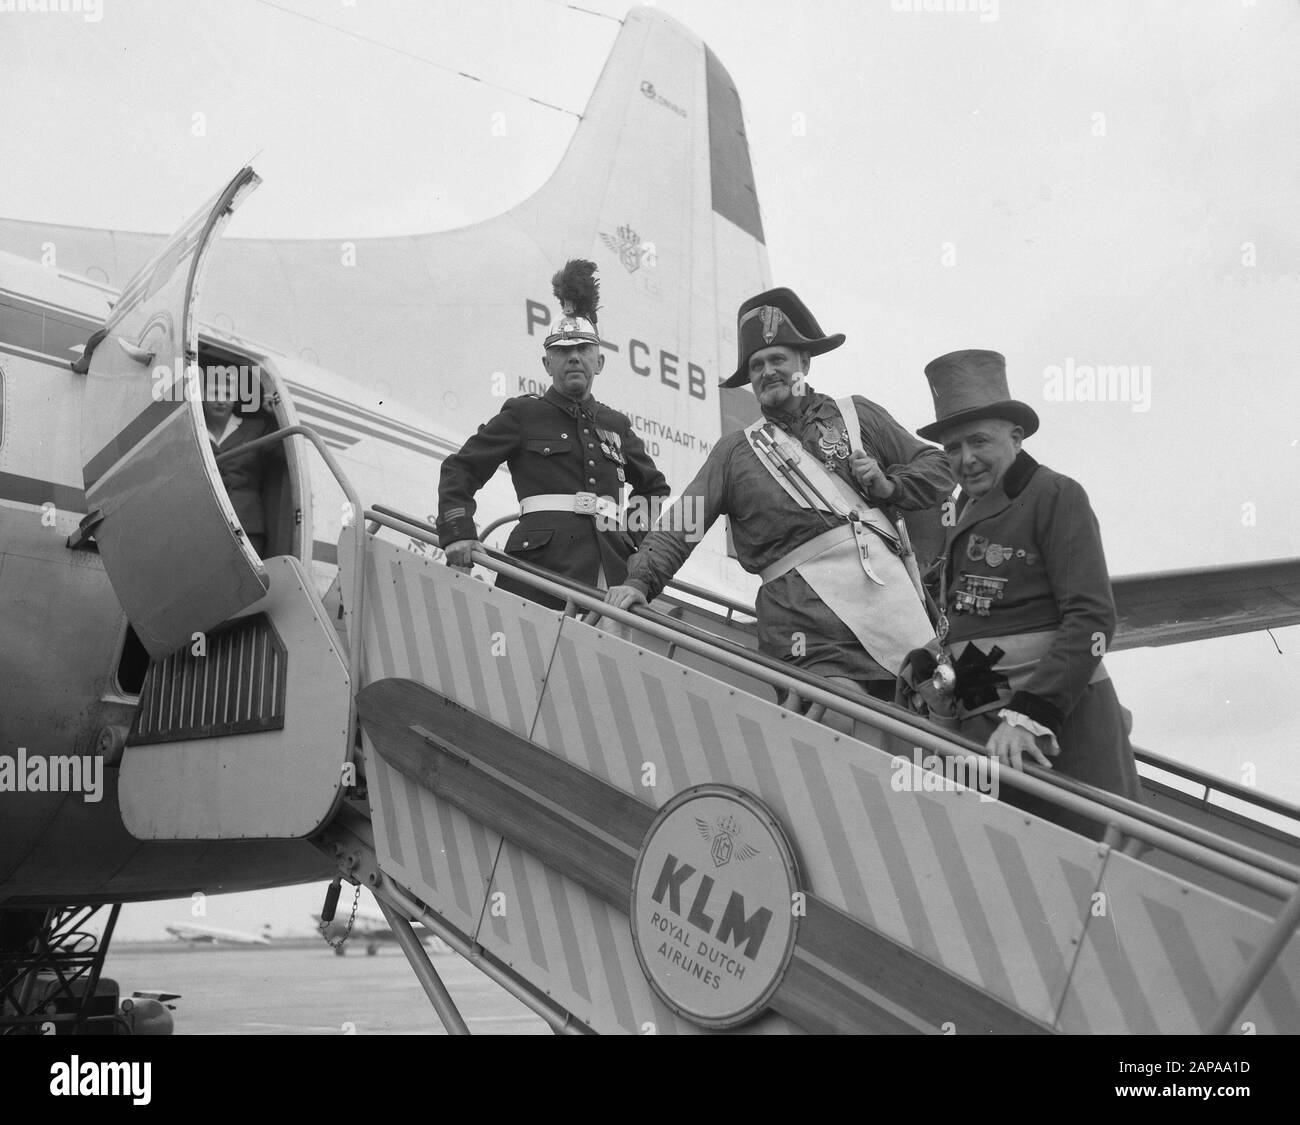 The Mayor of Montmartre and Commander Fire Department at Schiphol for opening Jordanfestival Date: 8 September 1956 Location: Noord-Holland, Schiphol Keywords: Openings, mayors Institution name: Jordaanfestival Stock Photo